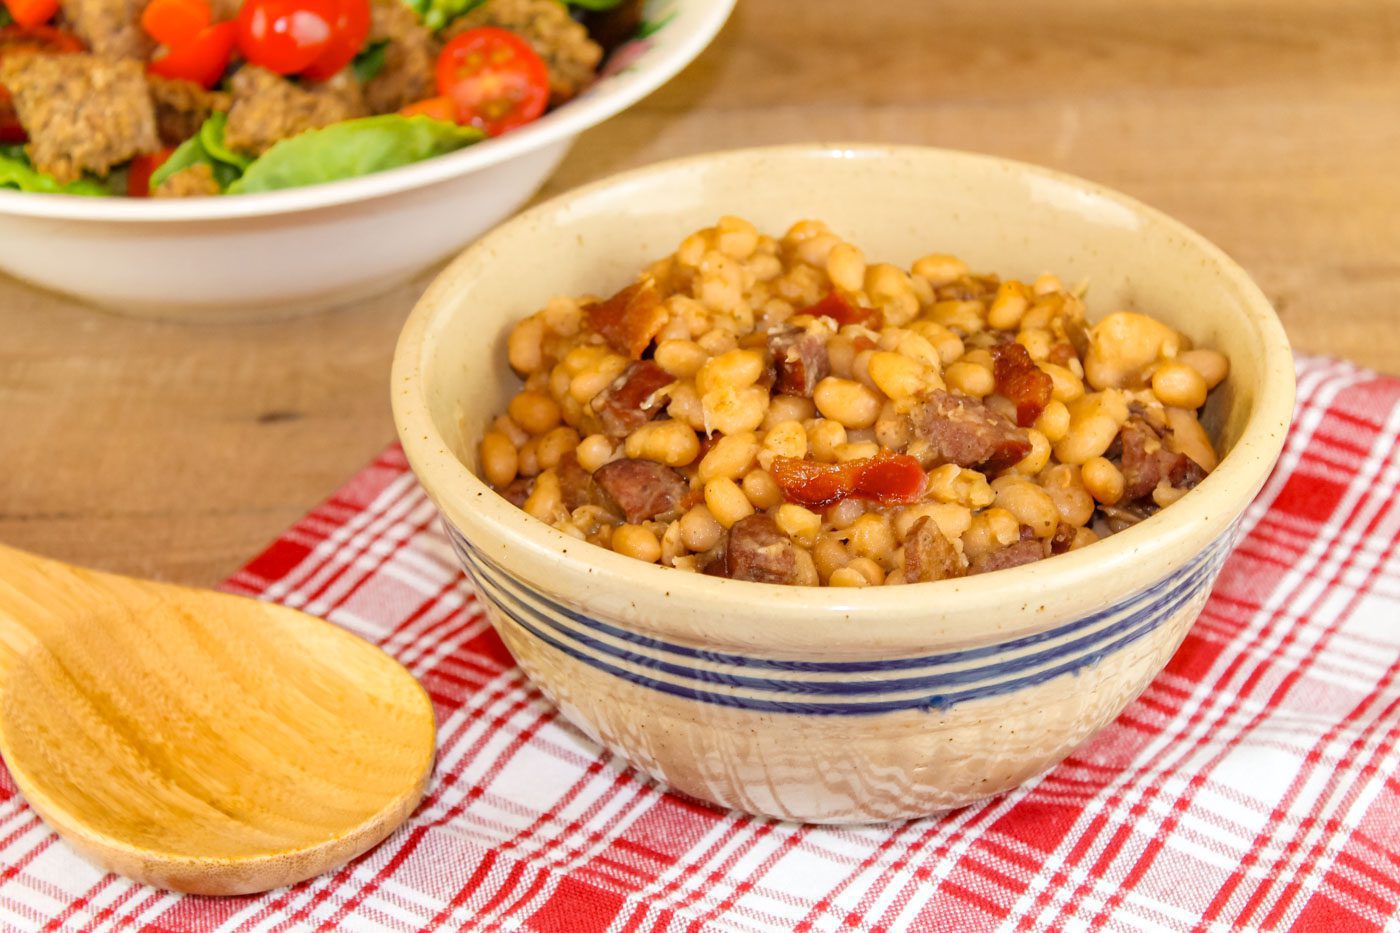 small bowl of homemade baked beans sits on top of a plaid napkin next to a wooden spoon